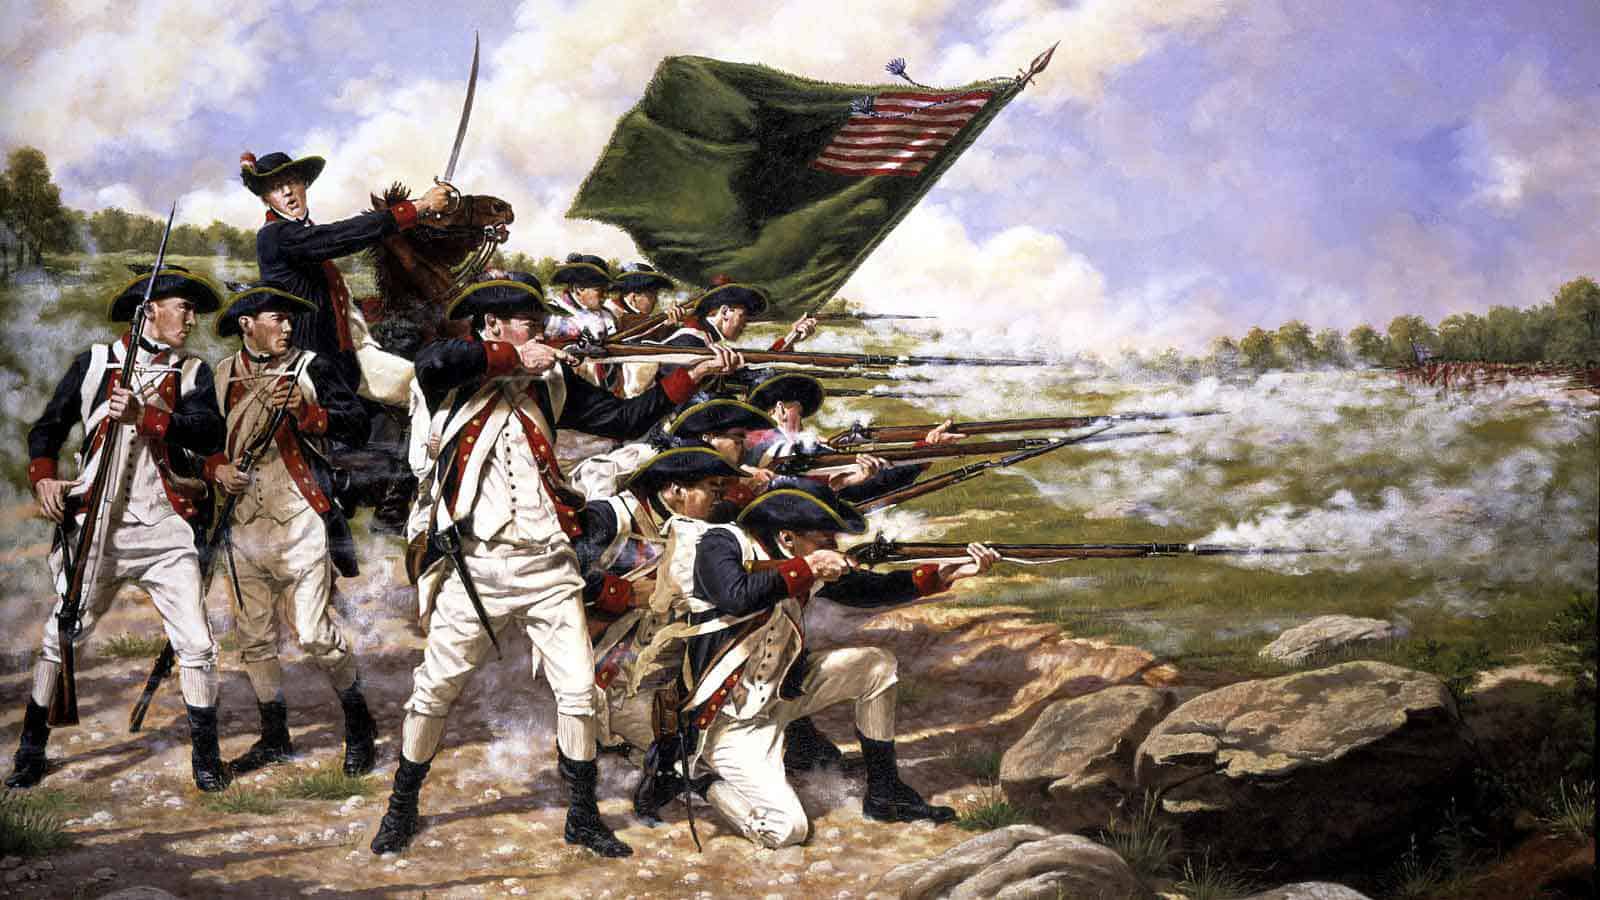 in the american revolution how many men were required for a regiment in the continental army